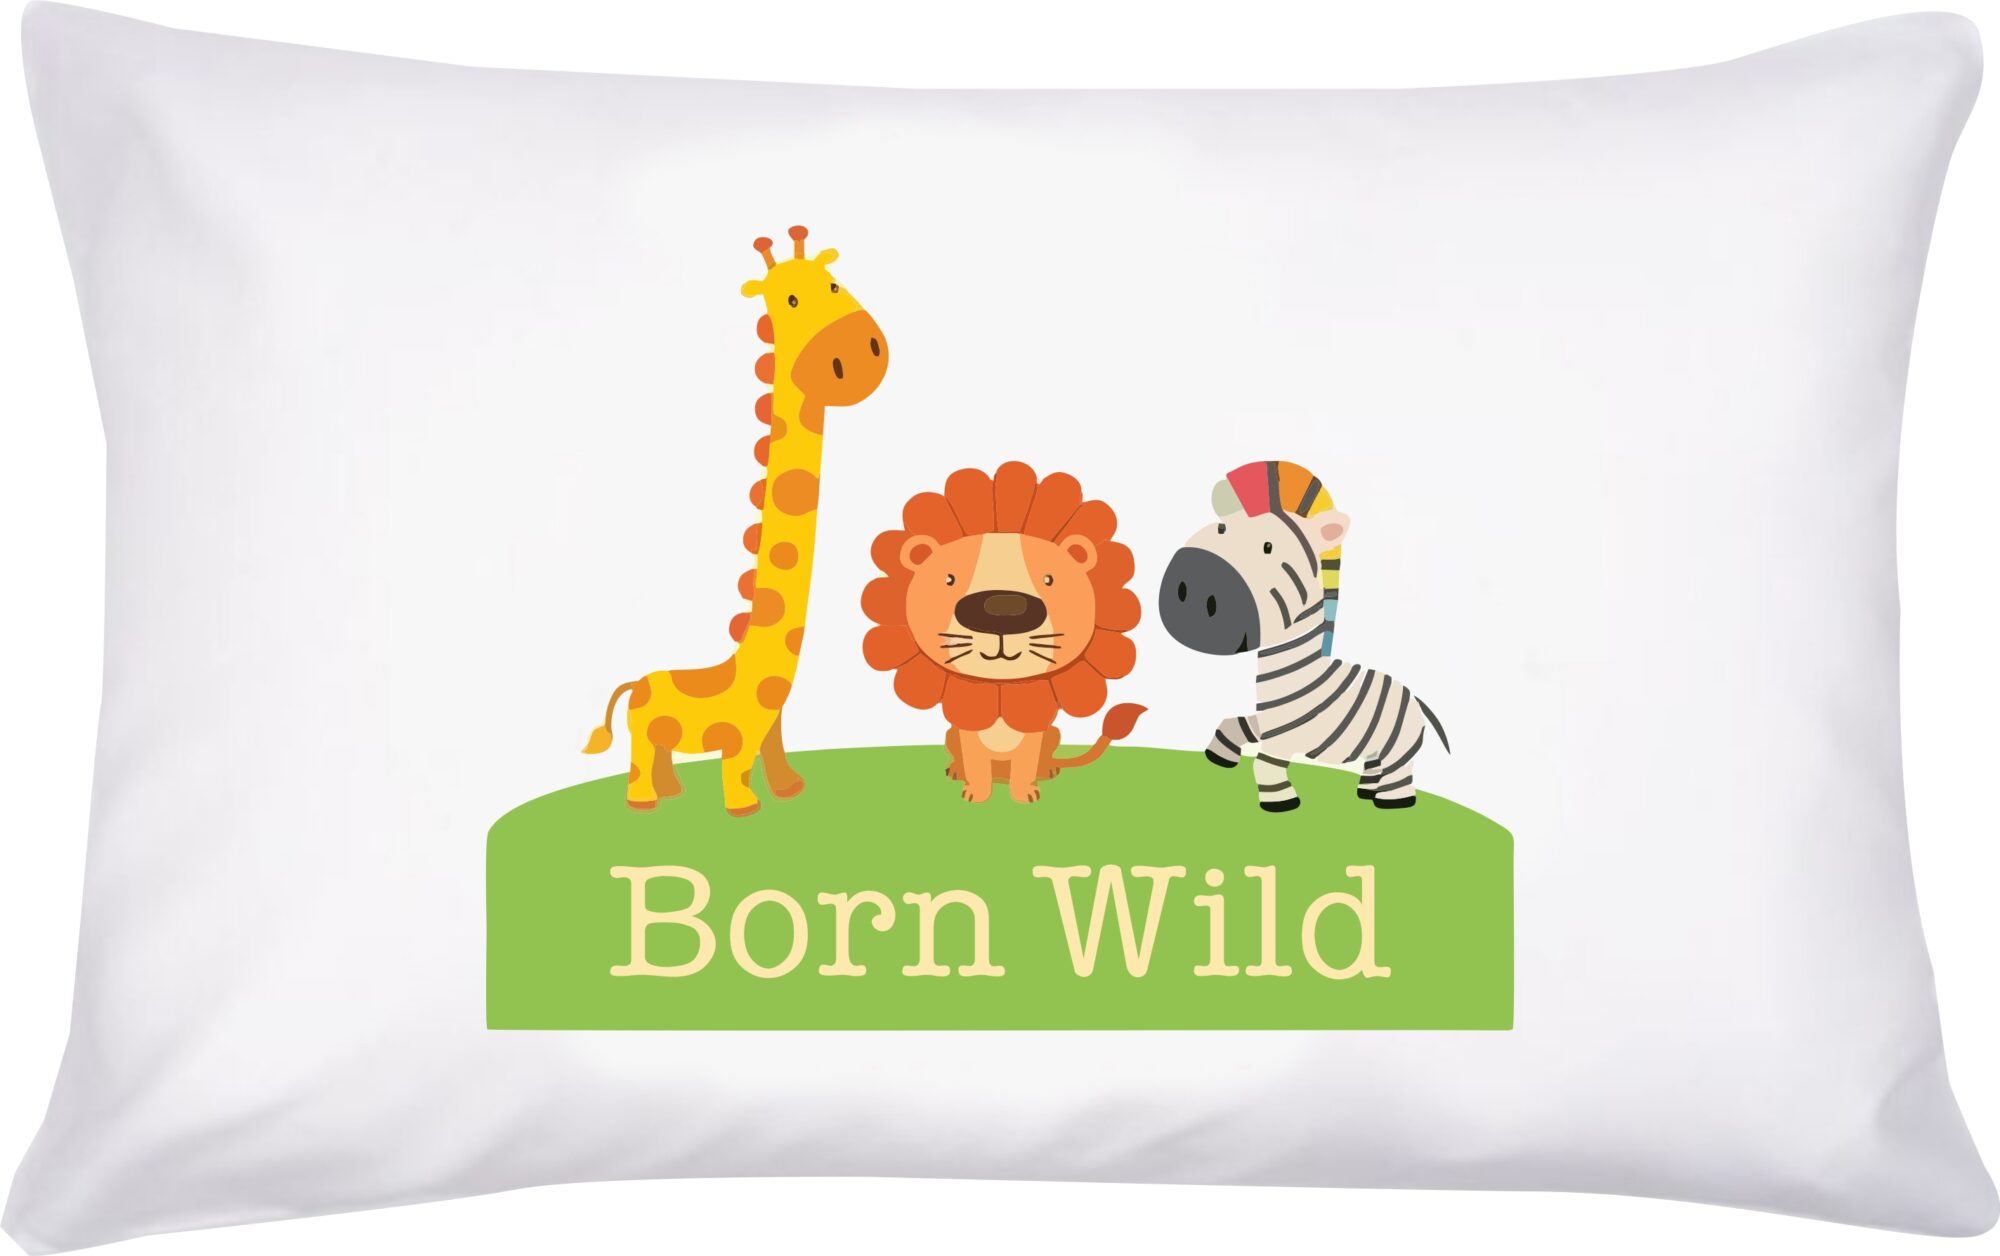 Pikkaboo Pillowcase Cover for Kids - Zoo